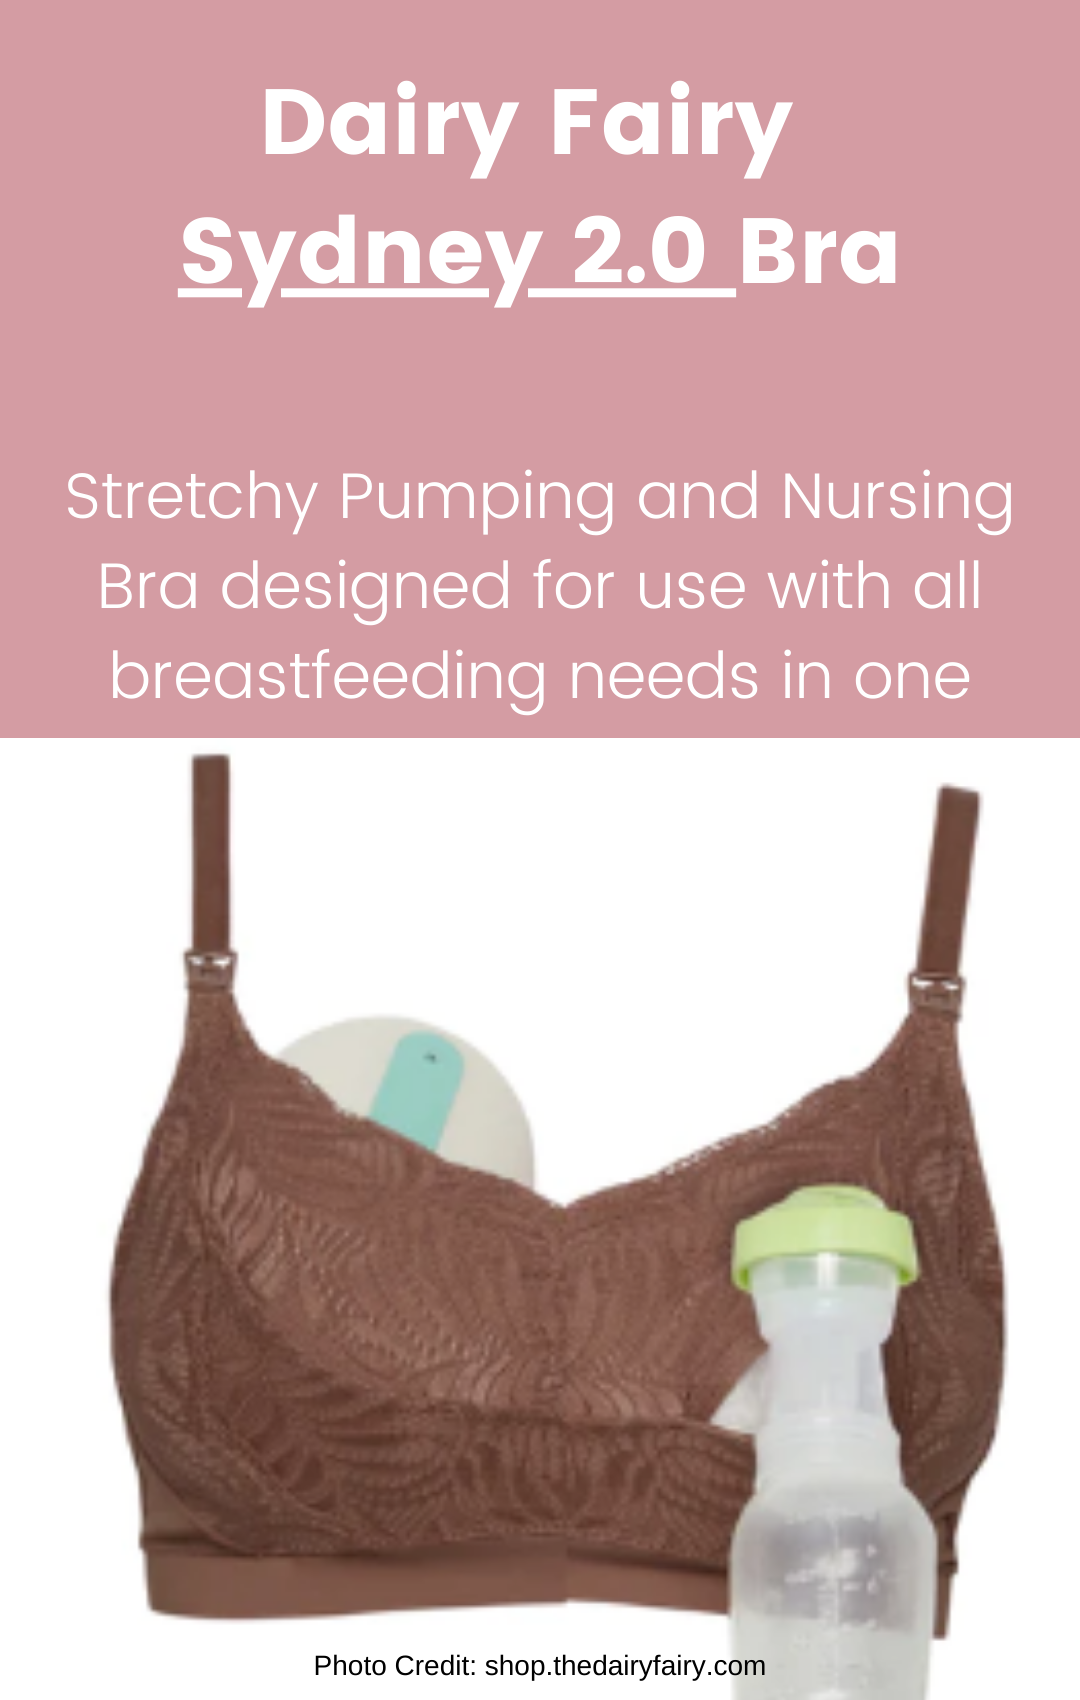 Momcozy M5 Wearable Breast Pump Review: The Perfect Pumping Option for